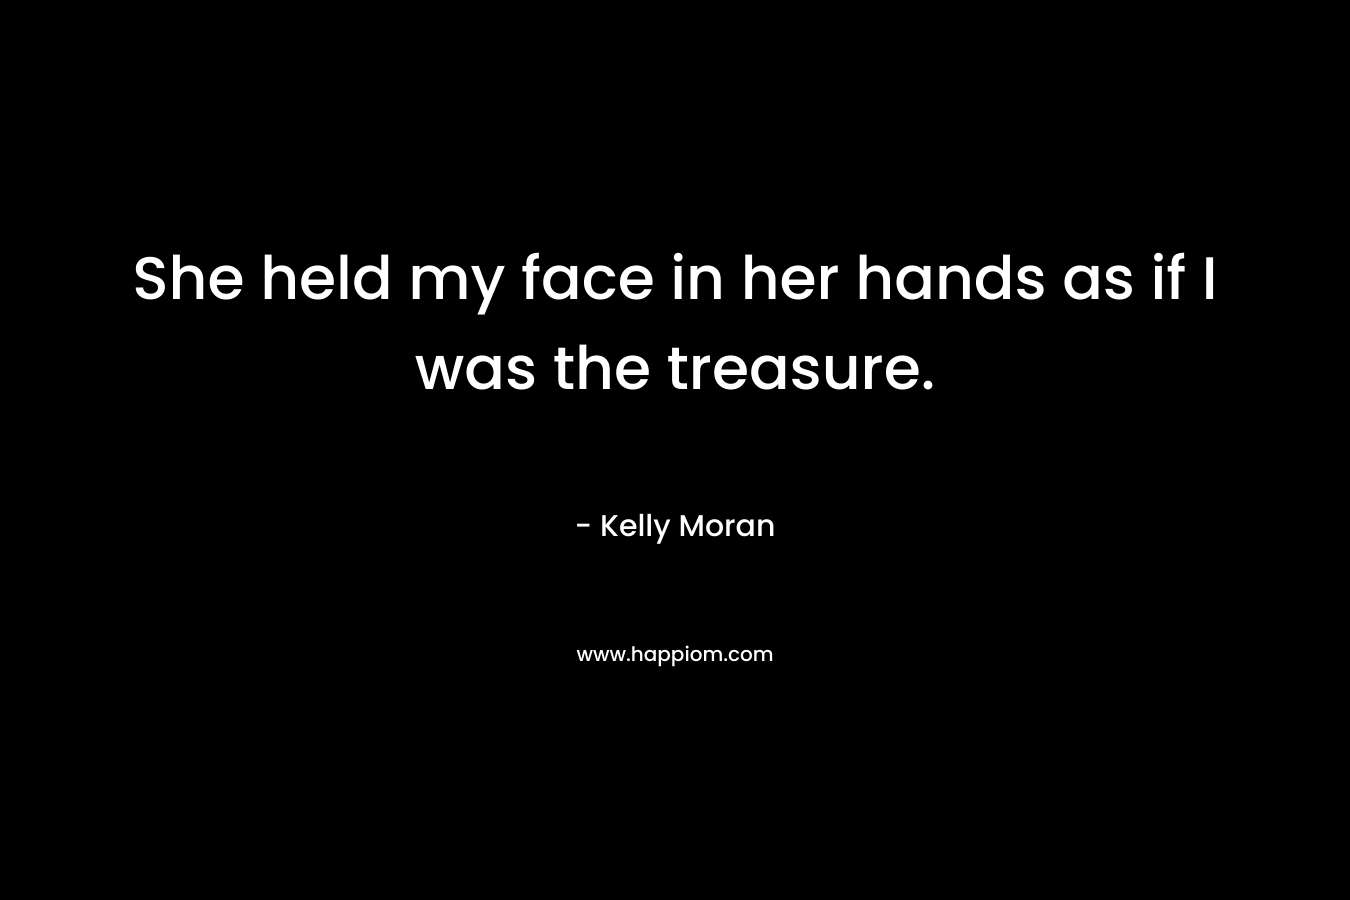 She held my face in her hands as if I was the treasure.